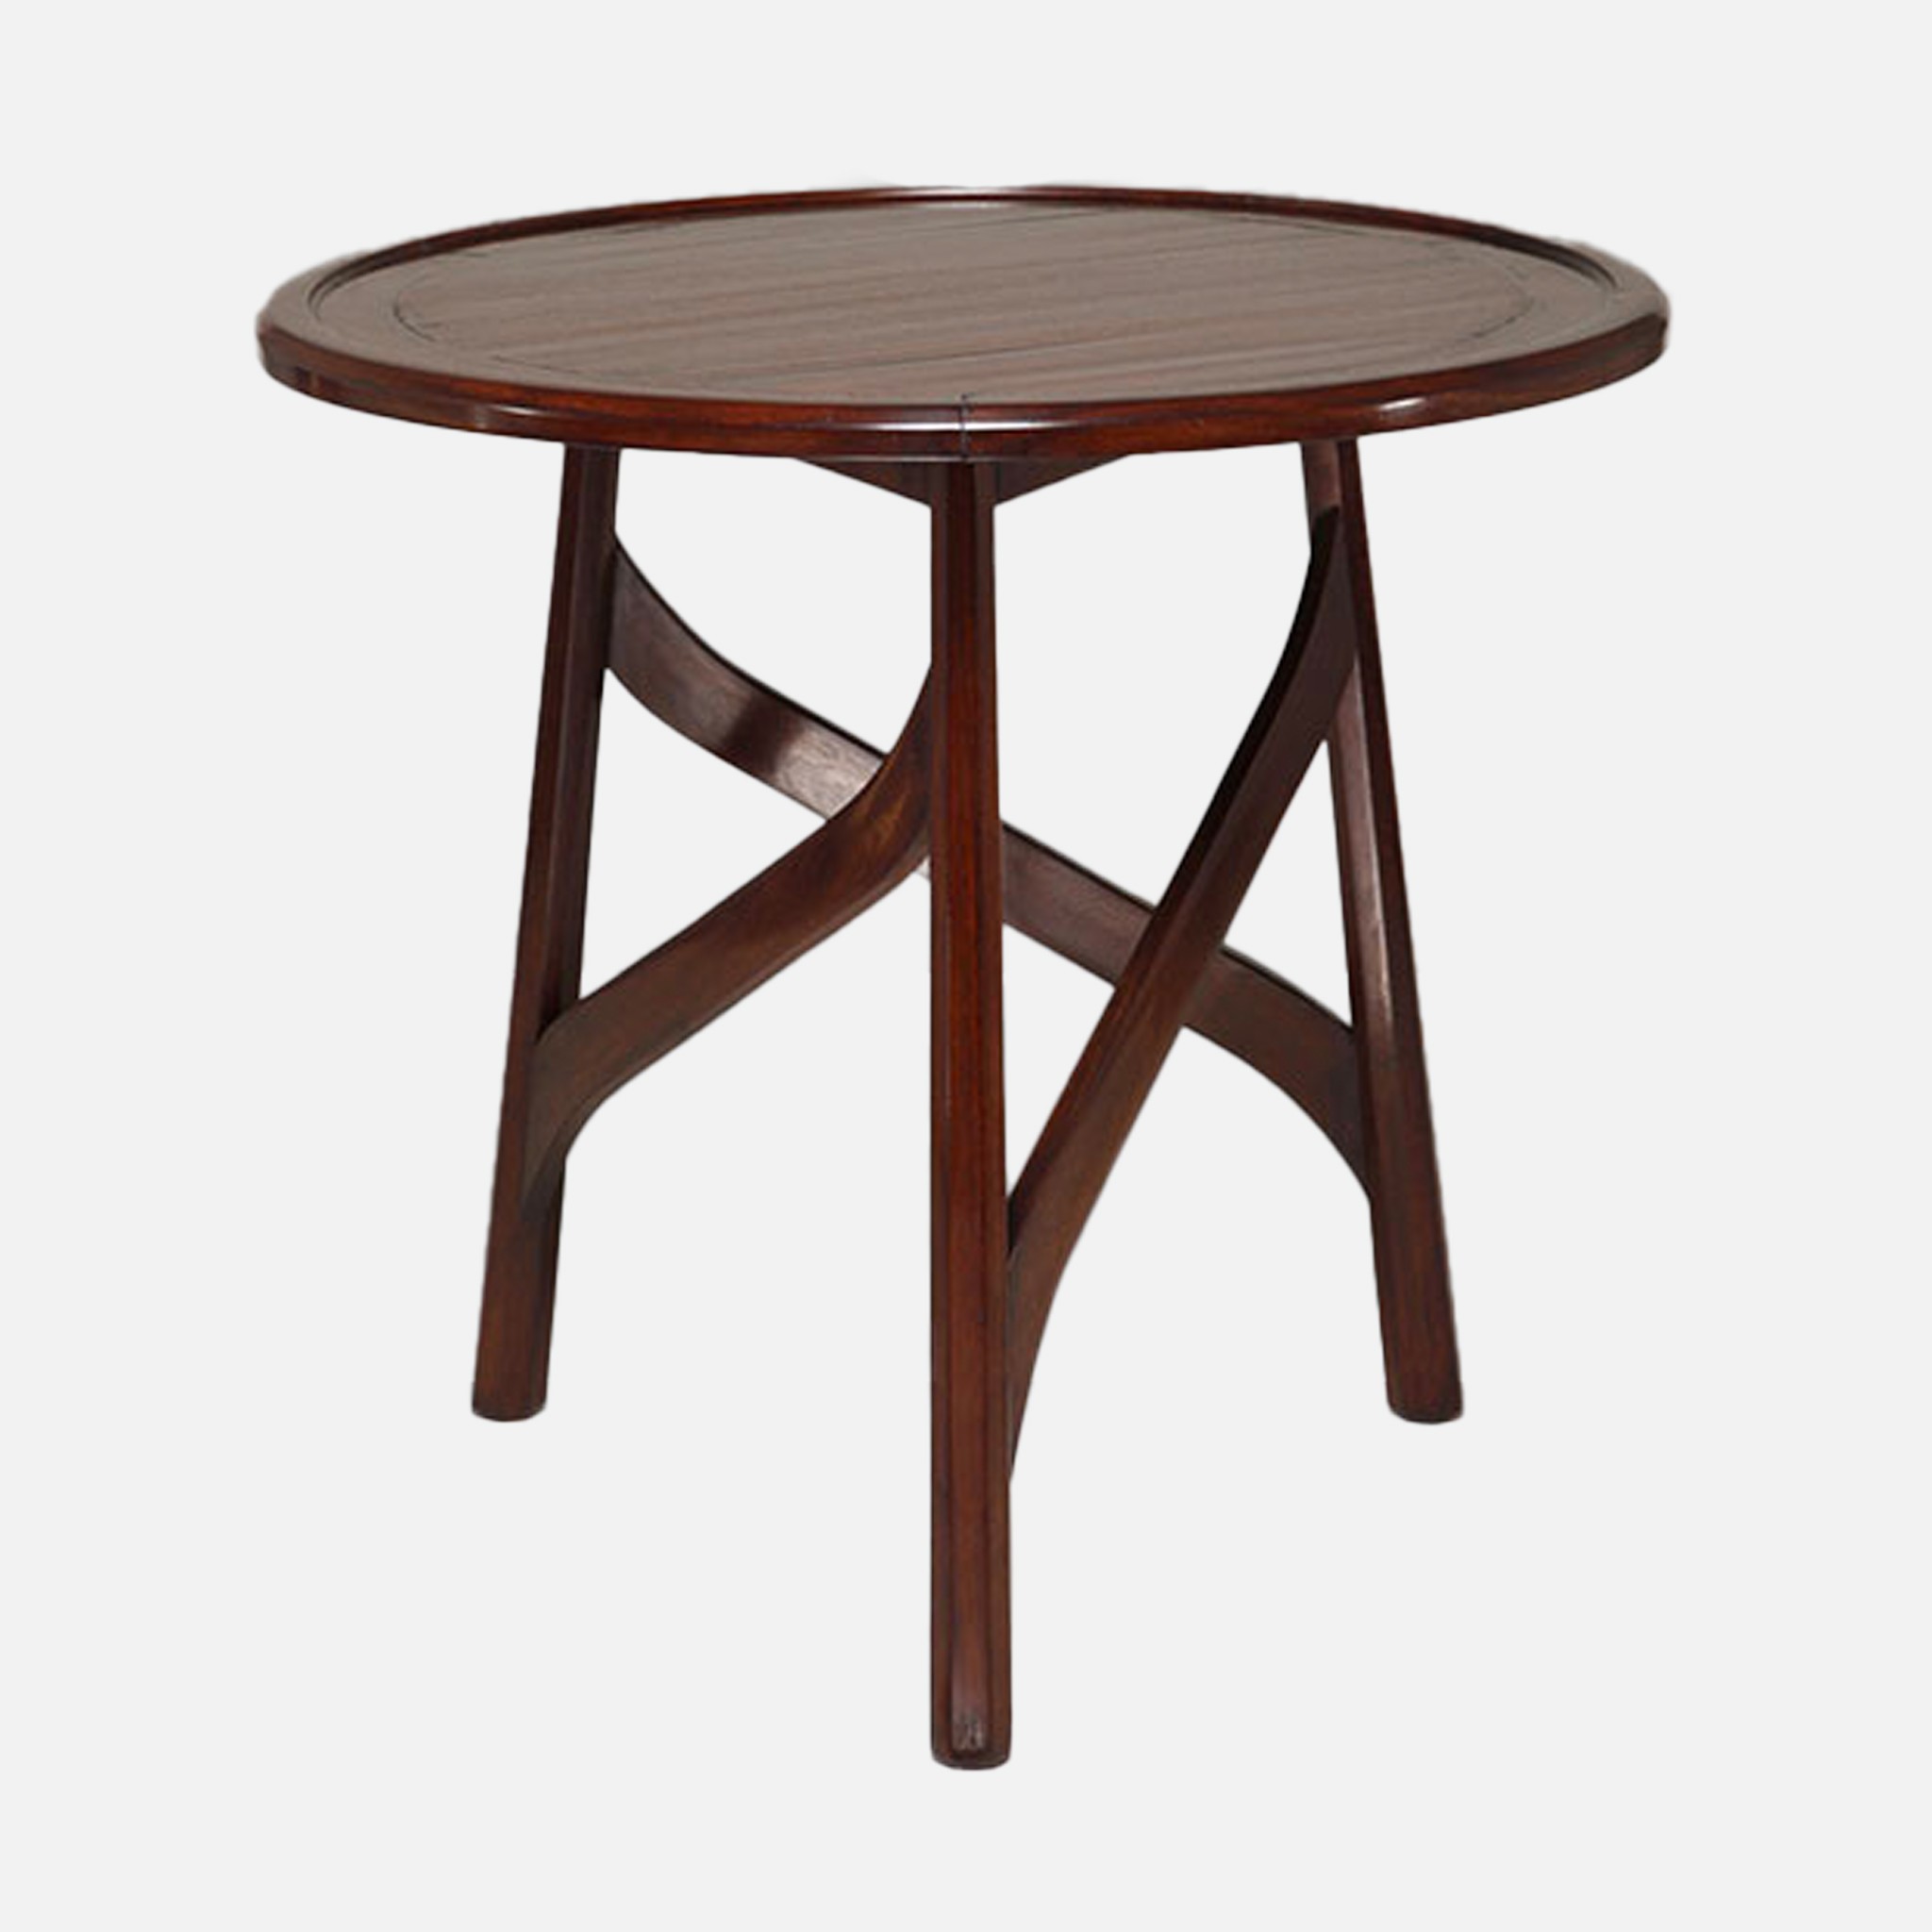 a round wooden table with a cross leg